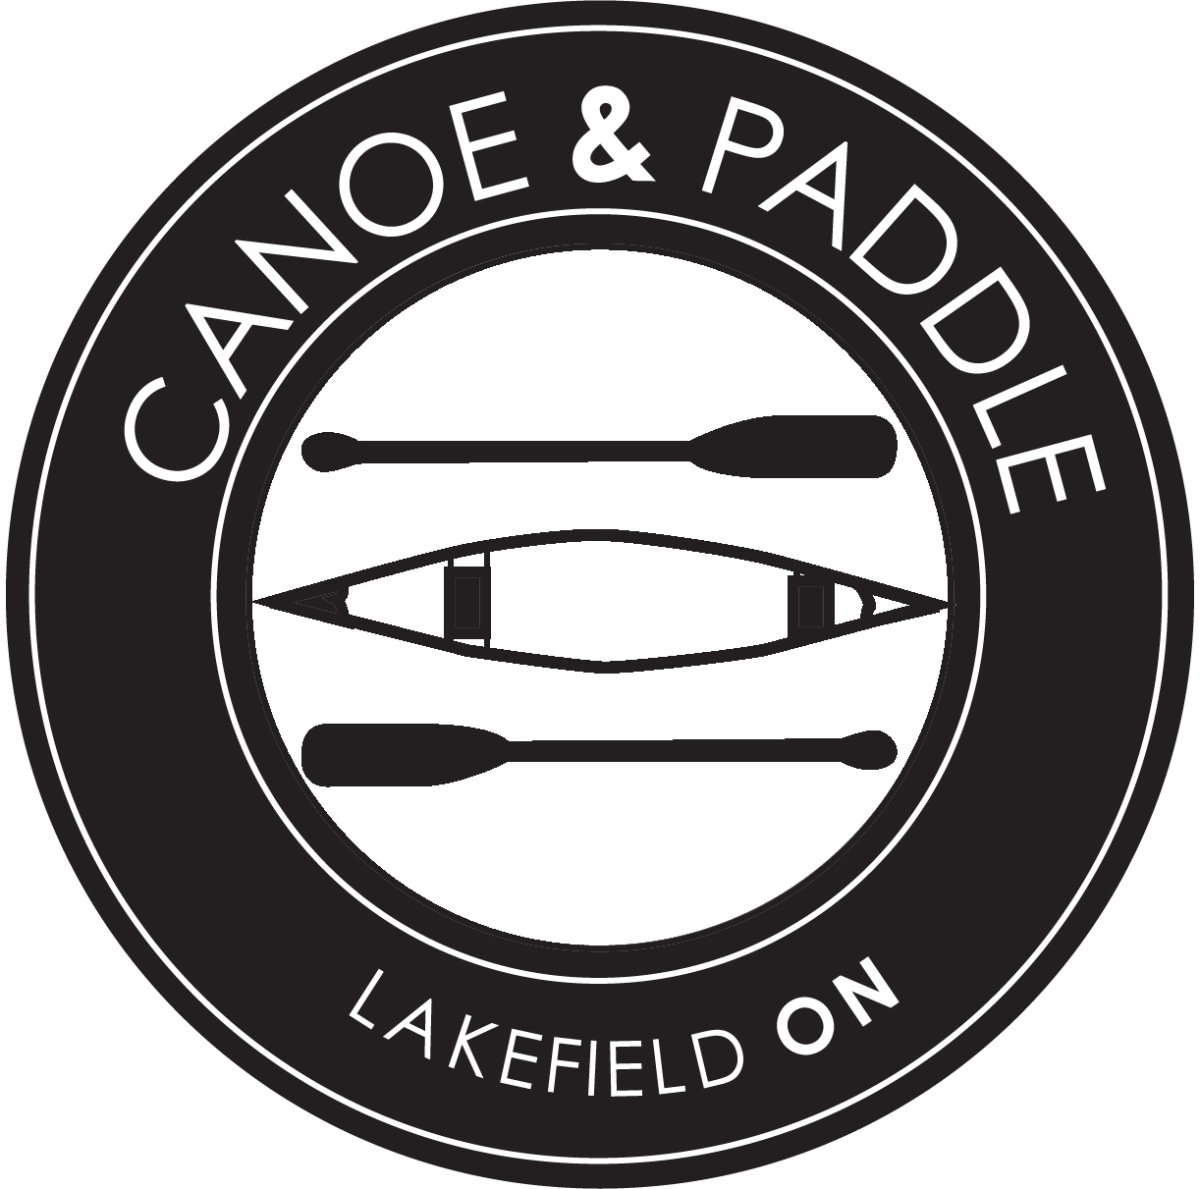 The Canoe and Paddle Restaurant in Lakefield is closed after two staff members were identified as potential COVID-19 cases.